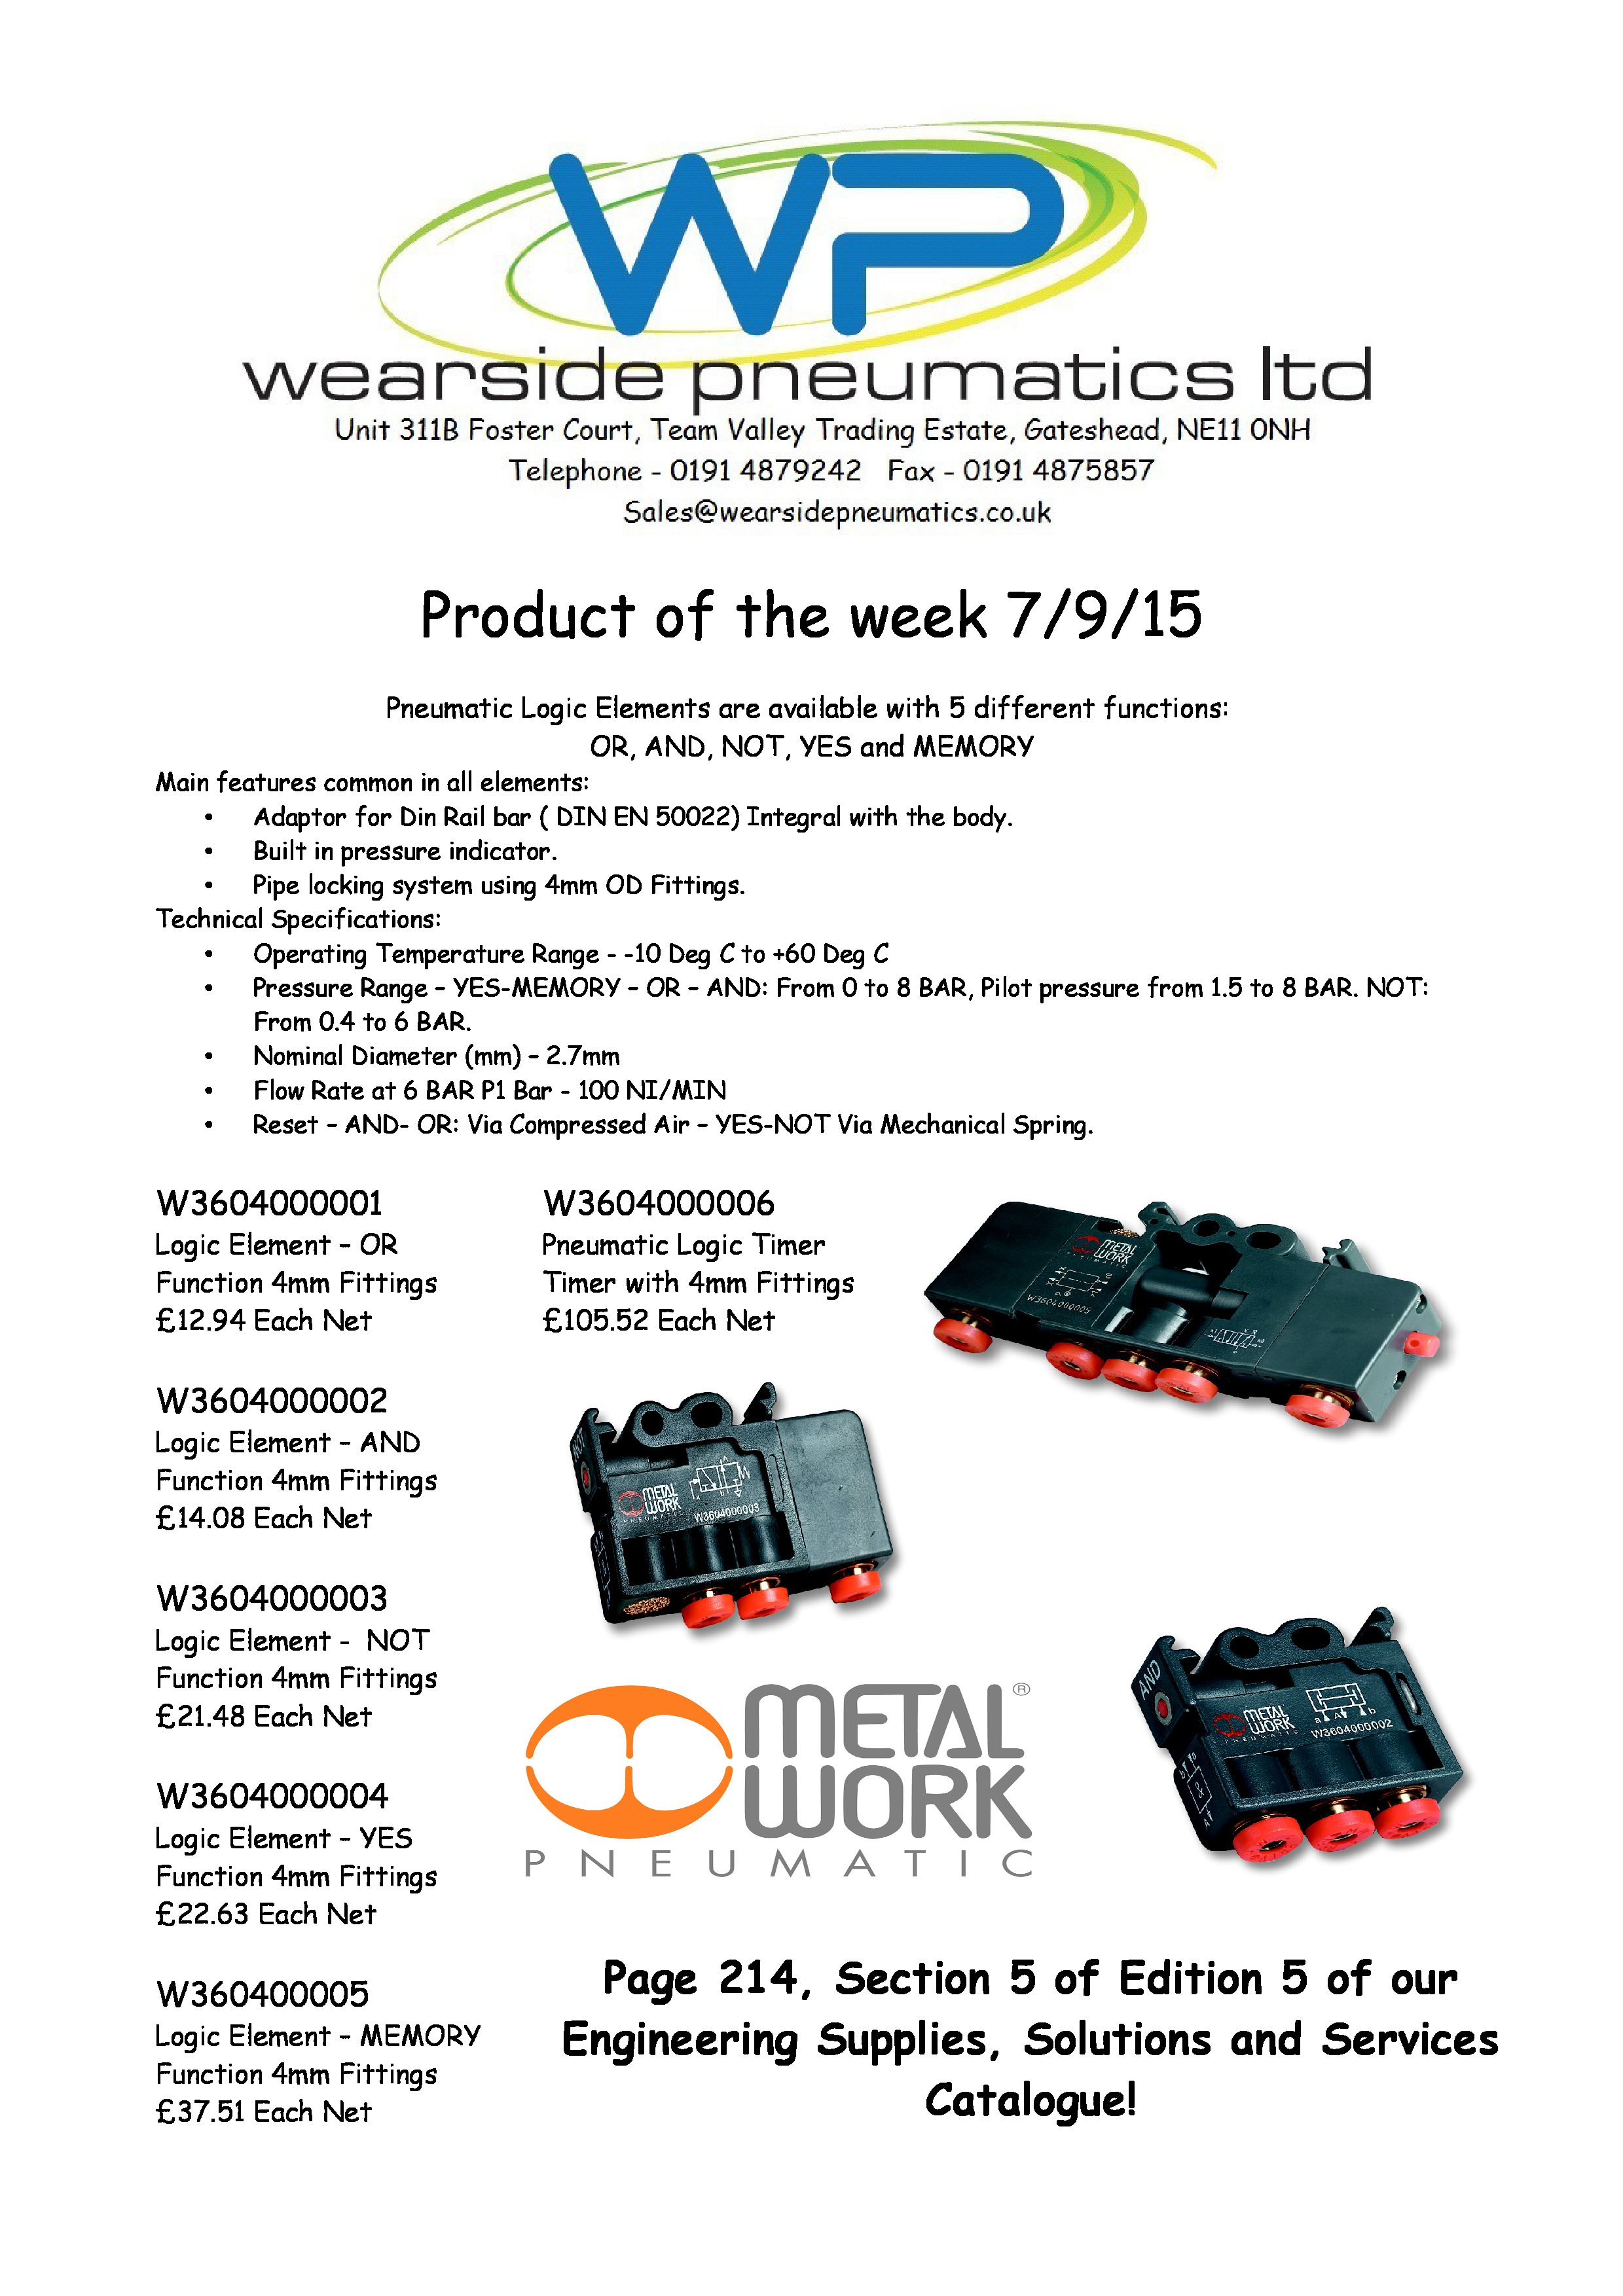 Product of the week 7/9/15 – Pneumatic Logic Valves